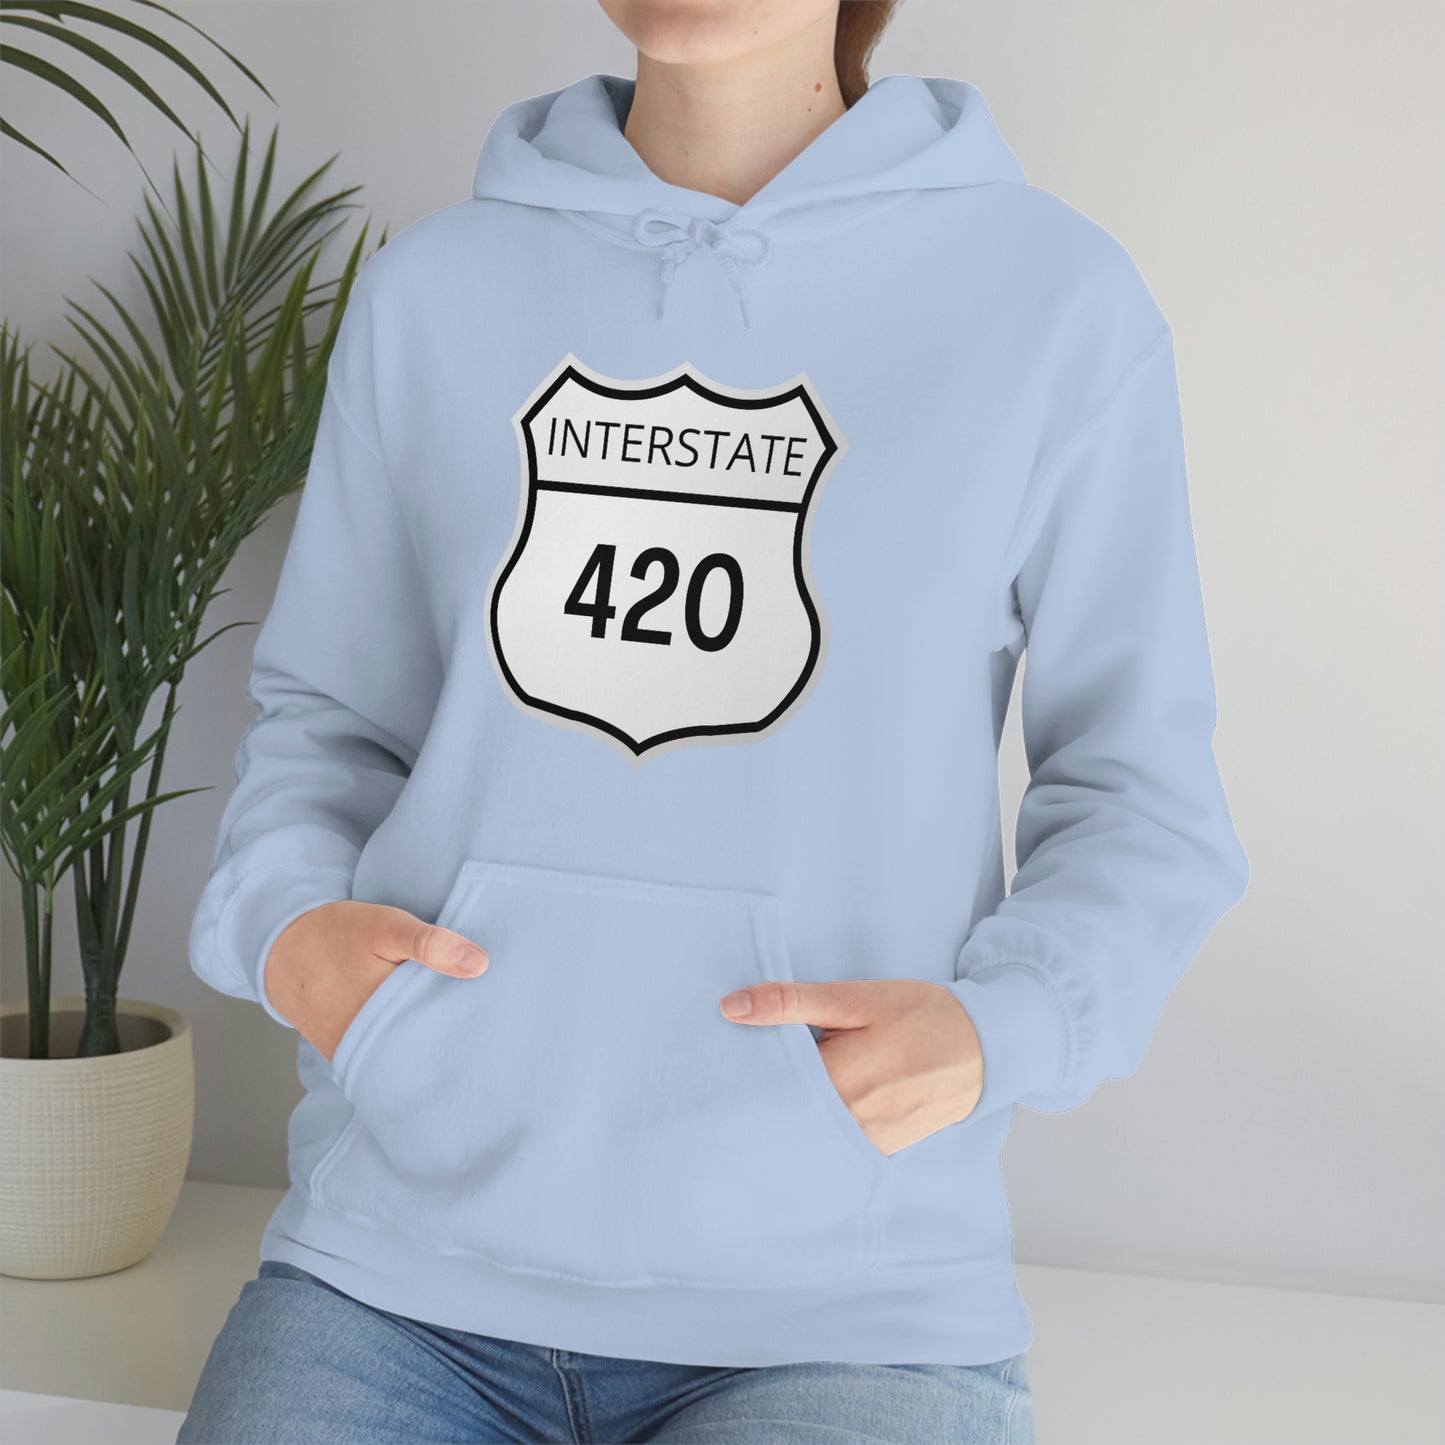 A woman wearing a light blue interstate 420 weed hoodie